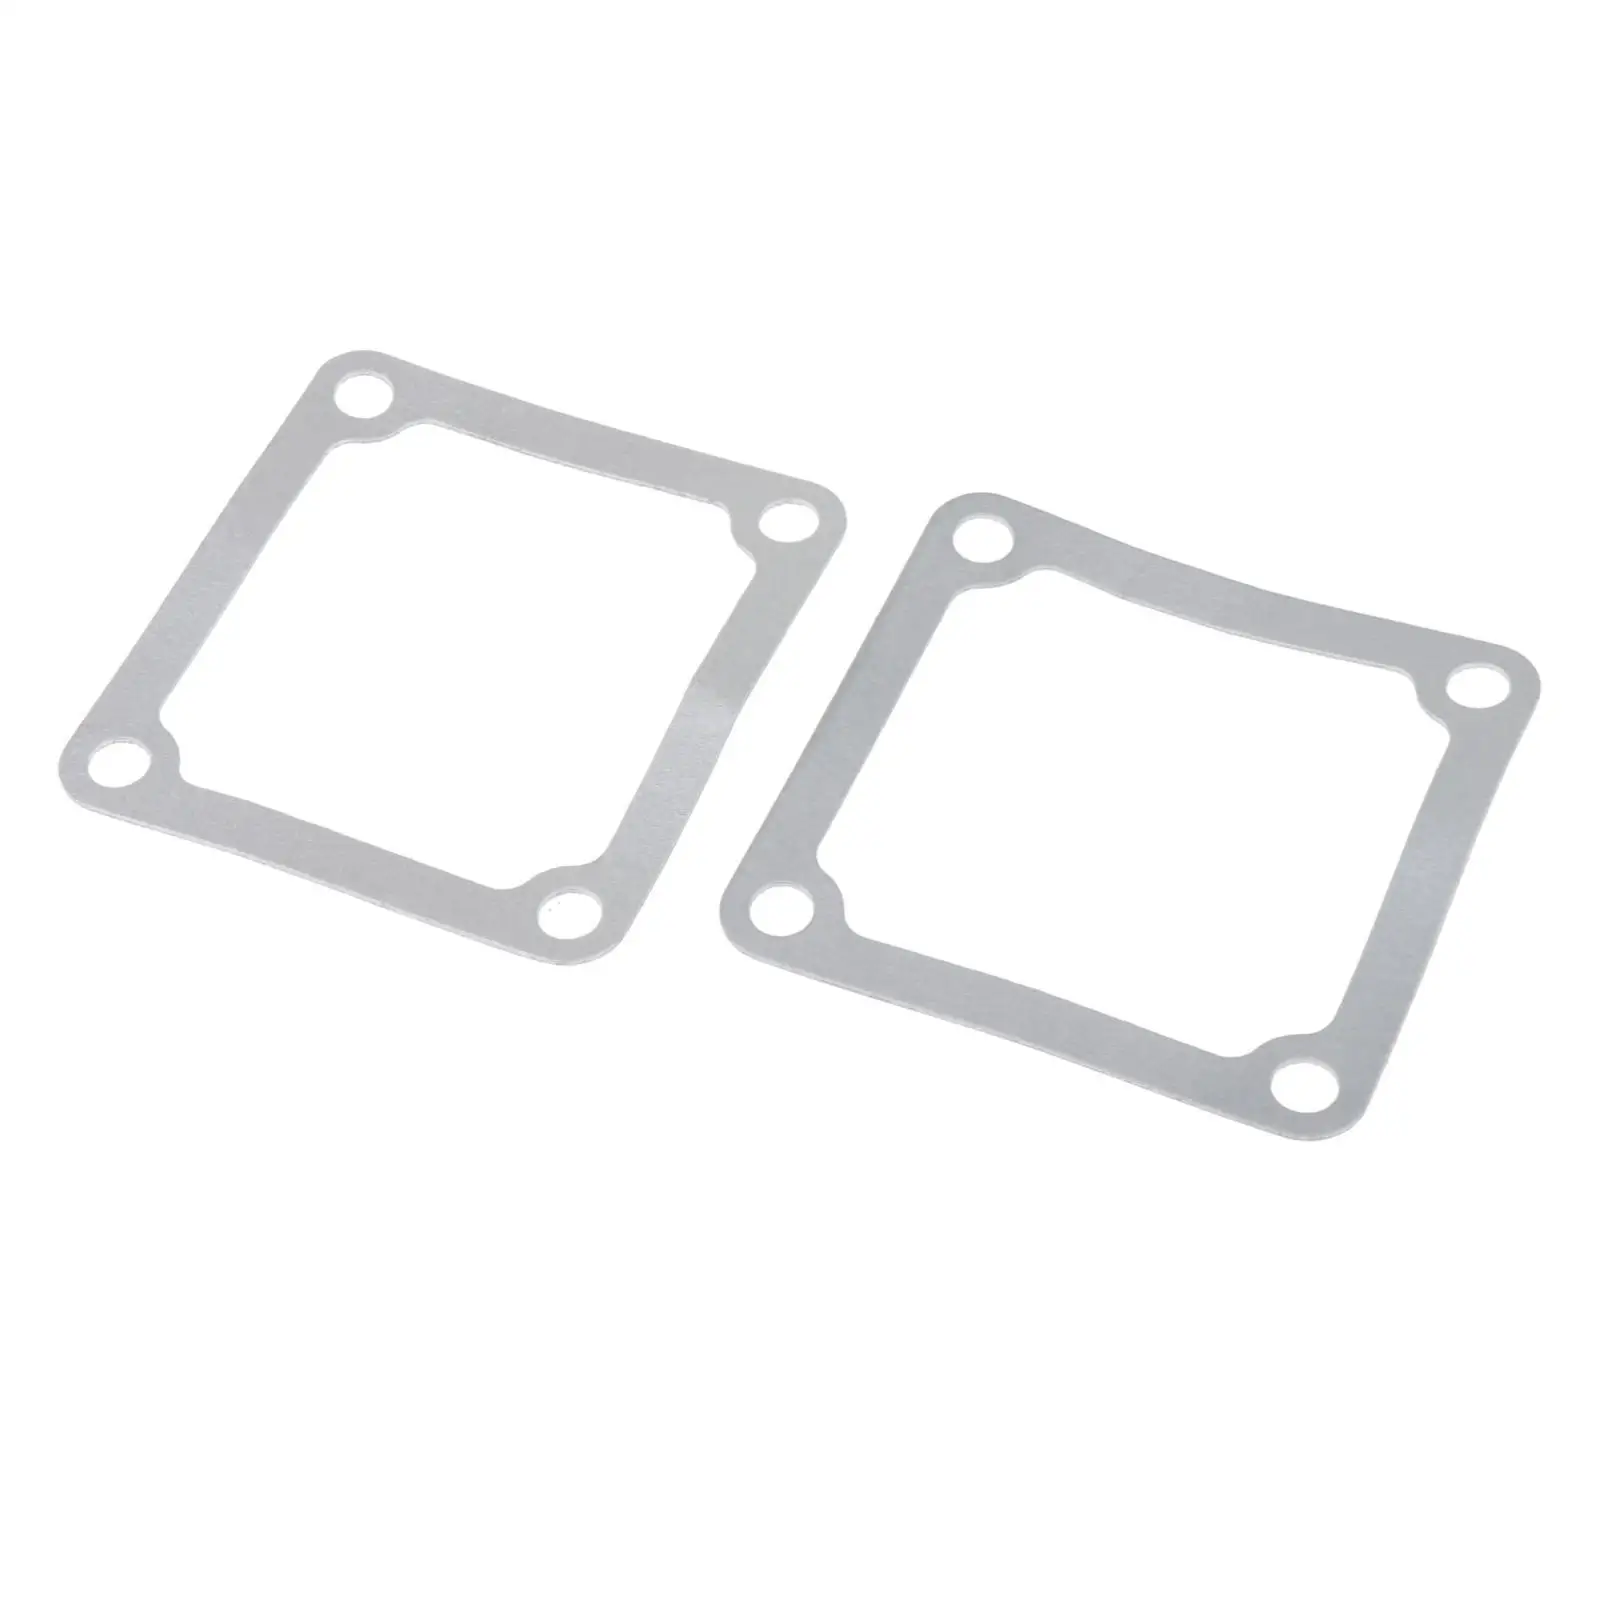 2 Pieces Intake Heater Grid Gaskets Spare Replacement Durable Automobile 89-07